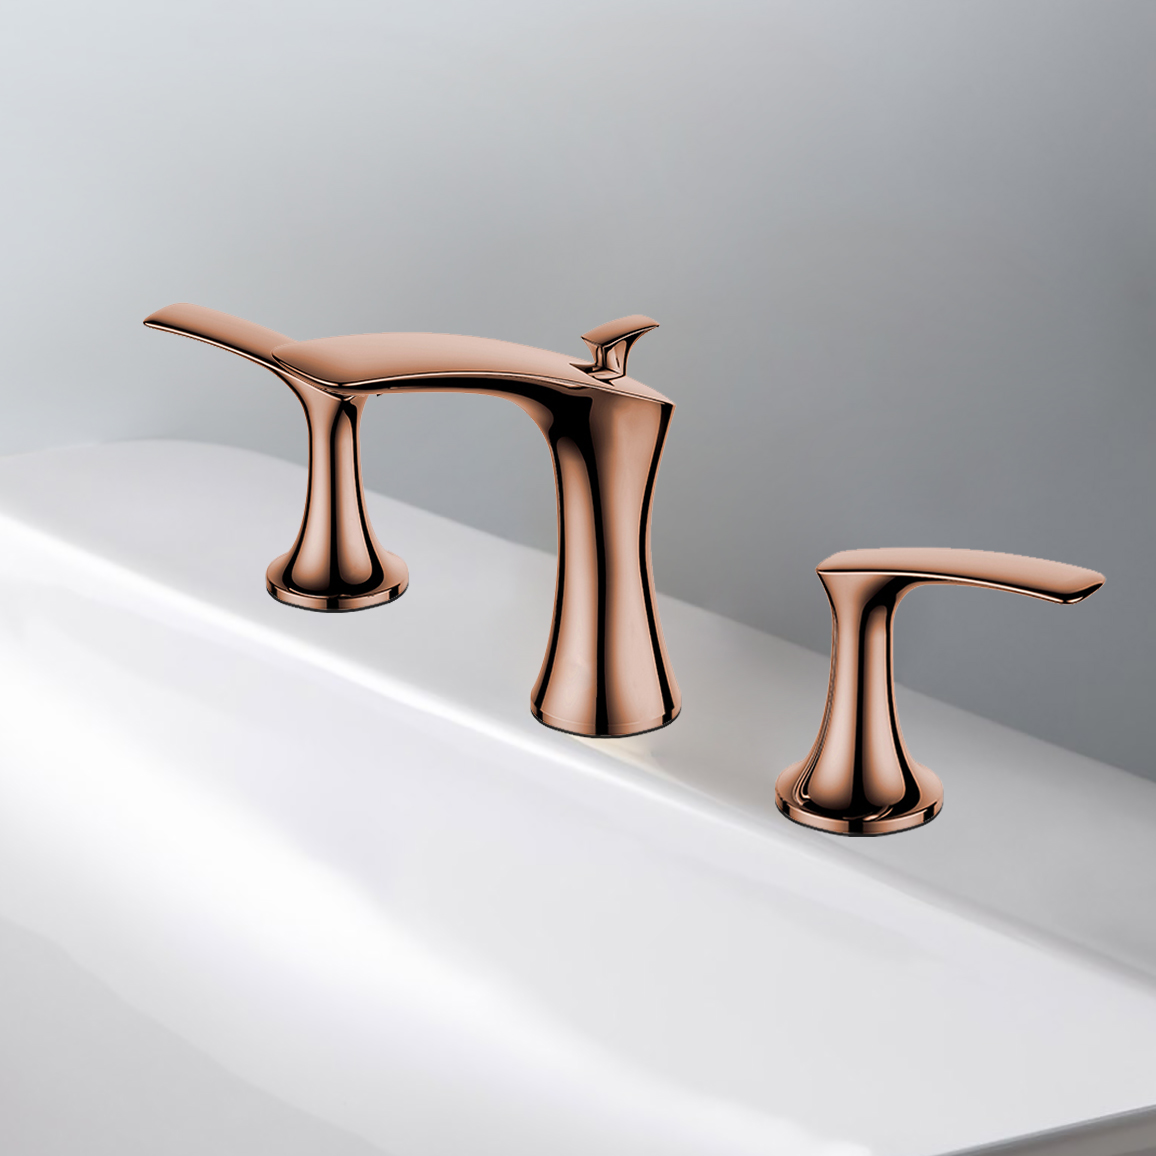 Lumina Solid Brass Luxurious 8 Inch Widespread Bathroom Faucet In Rose Gold Finish